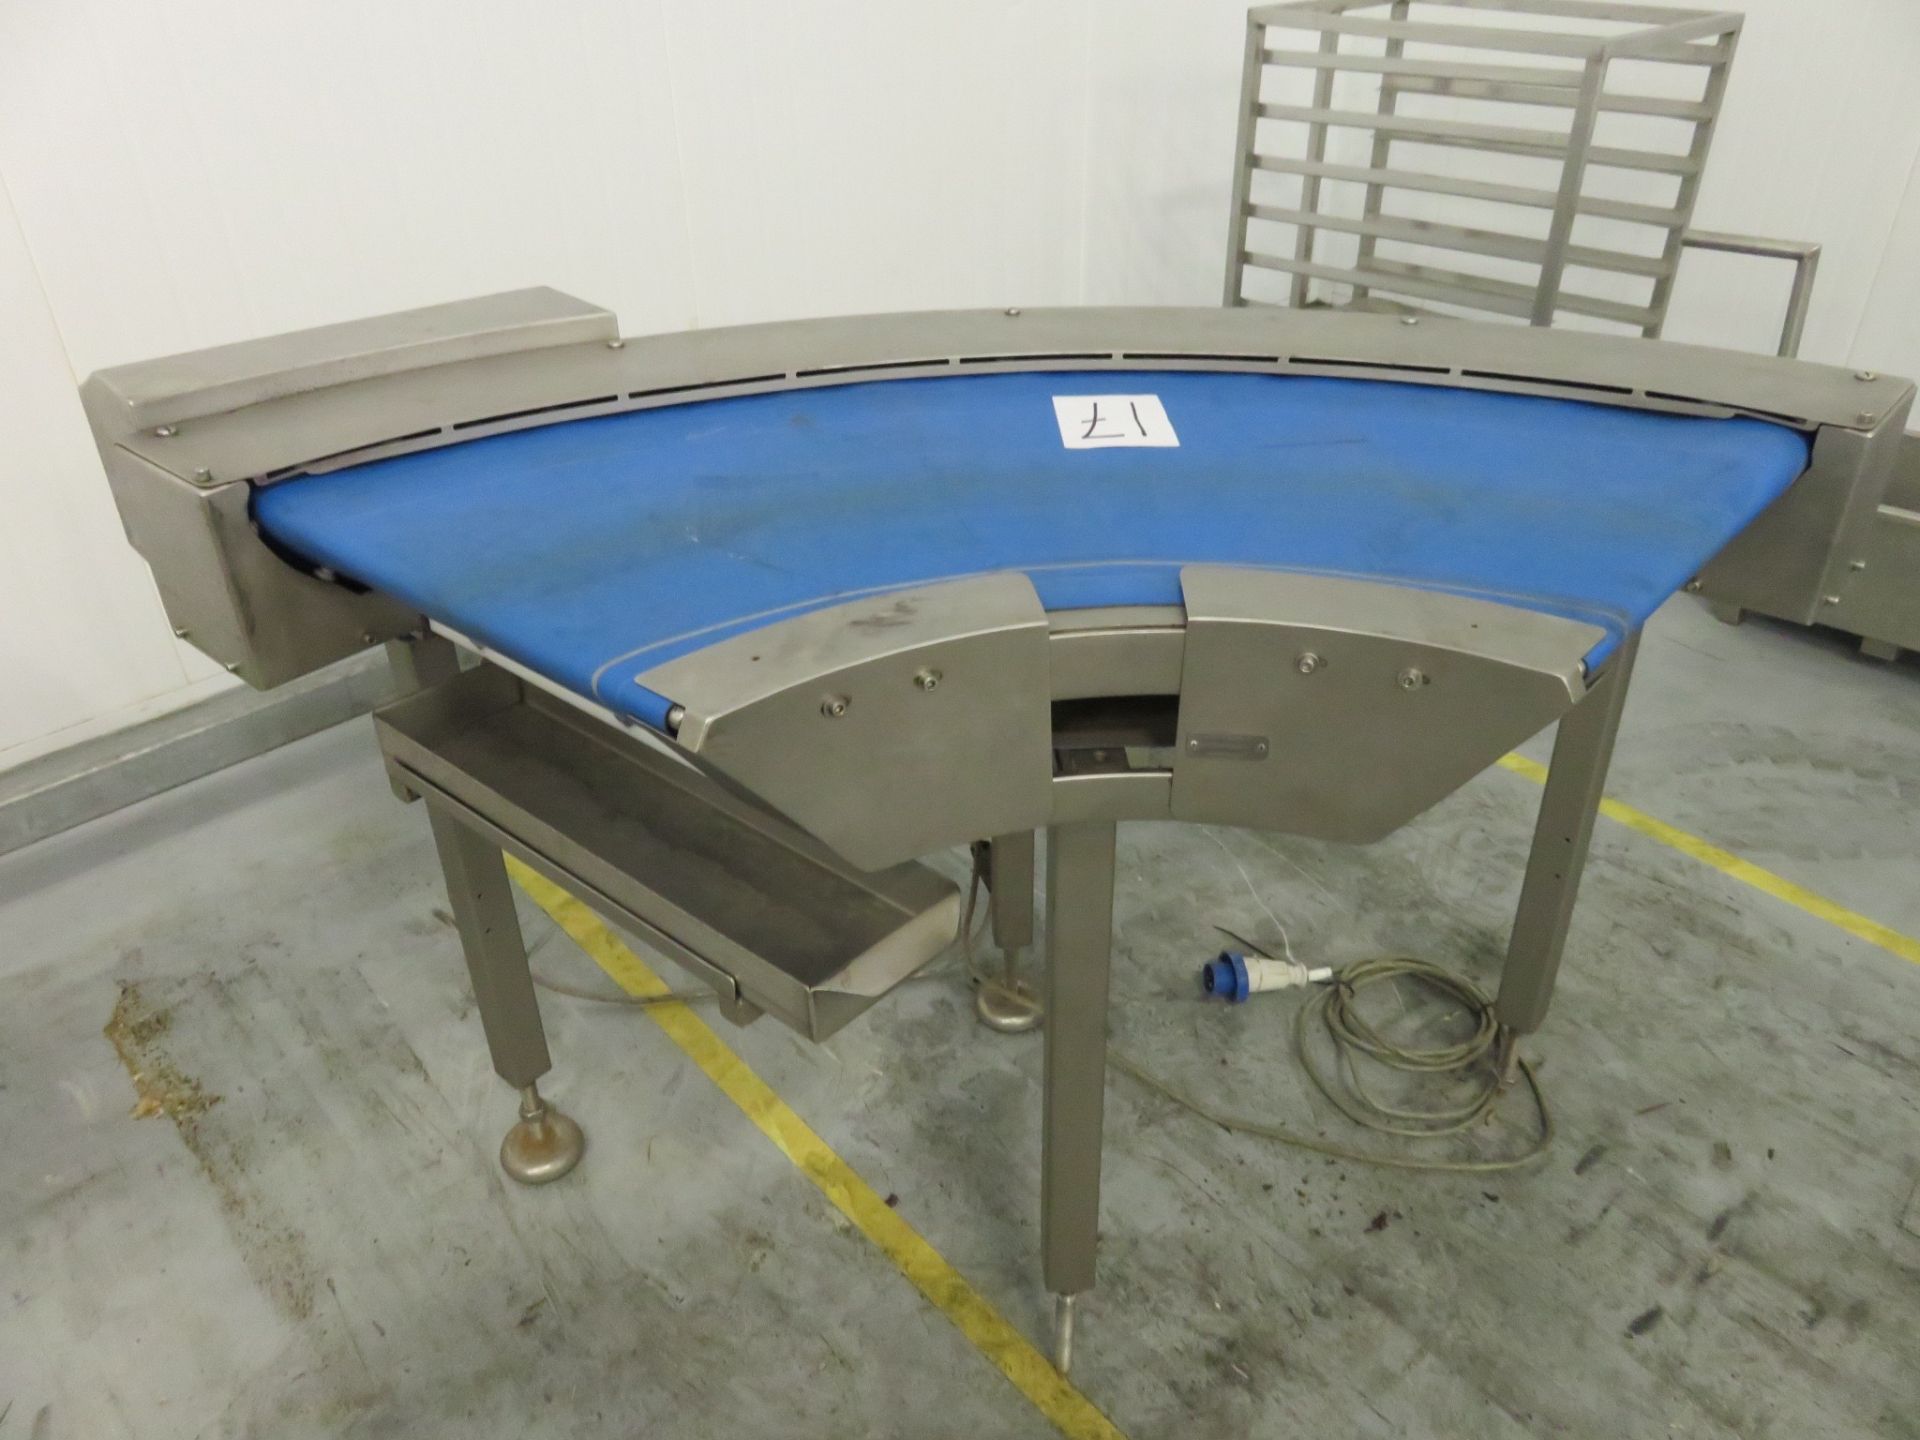 45 degree bend Conveyor. Variable speed. 500 mm wide blue belt. Approx. 1300mmLIFT OUT CHARGE £20 - Image 3 of 3